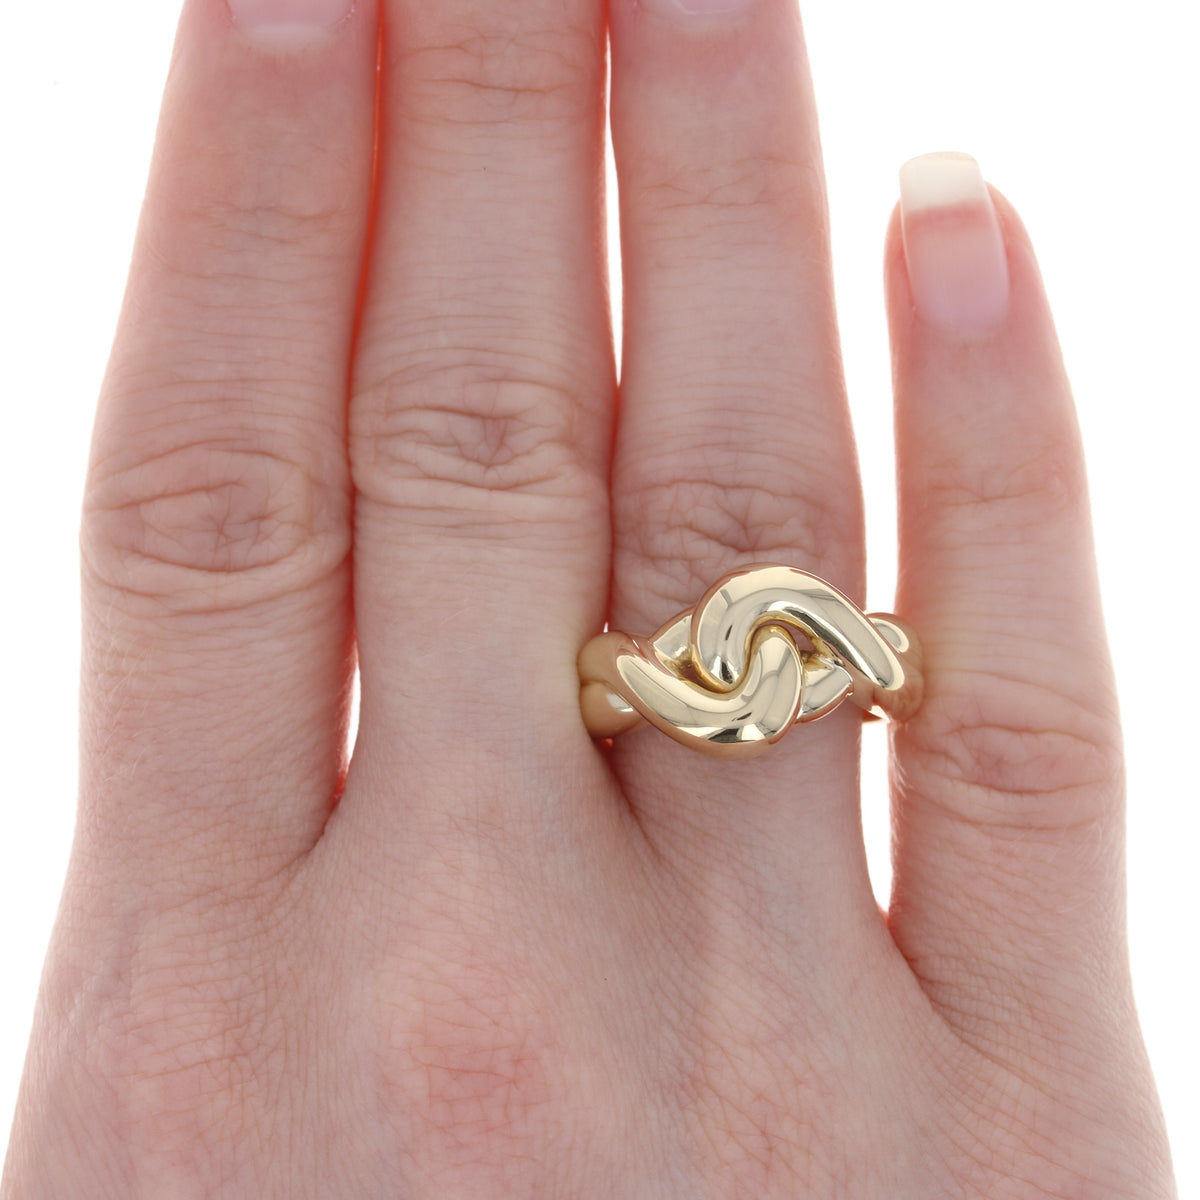 Love Knot Ring Yellow Gold